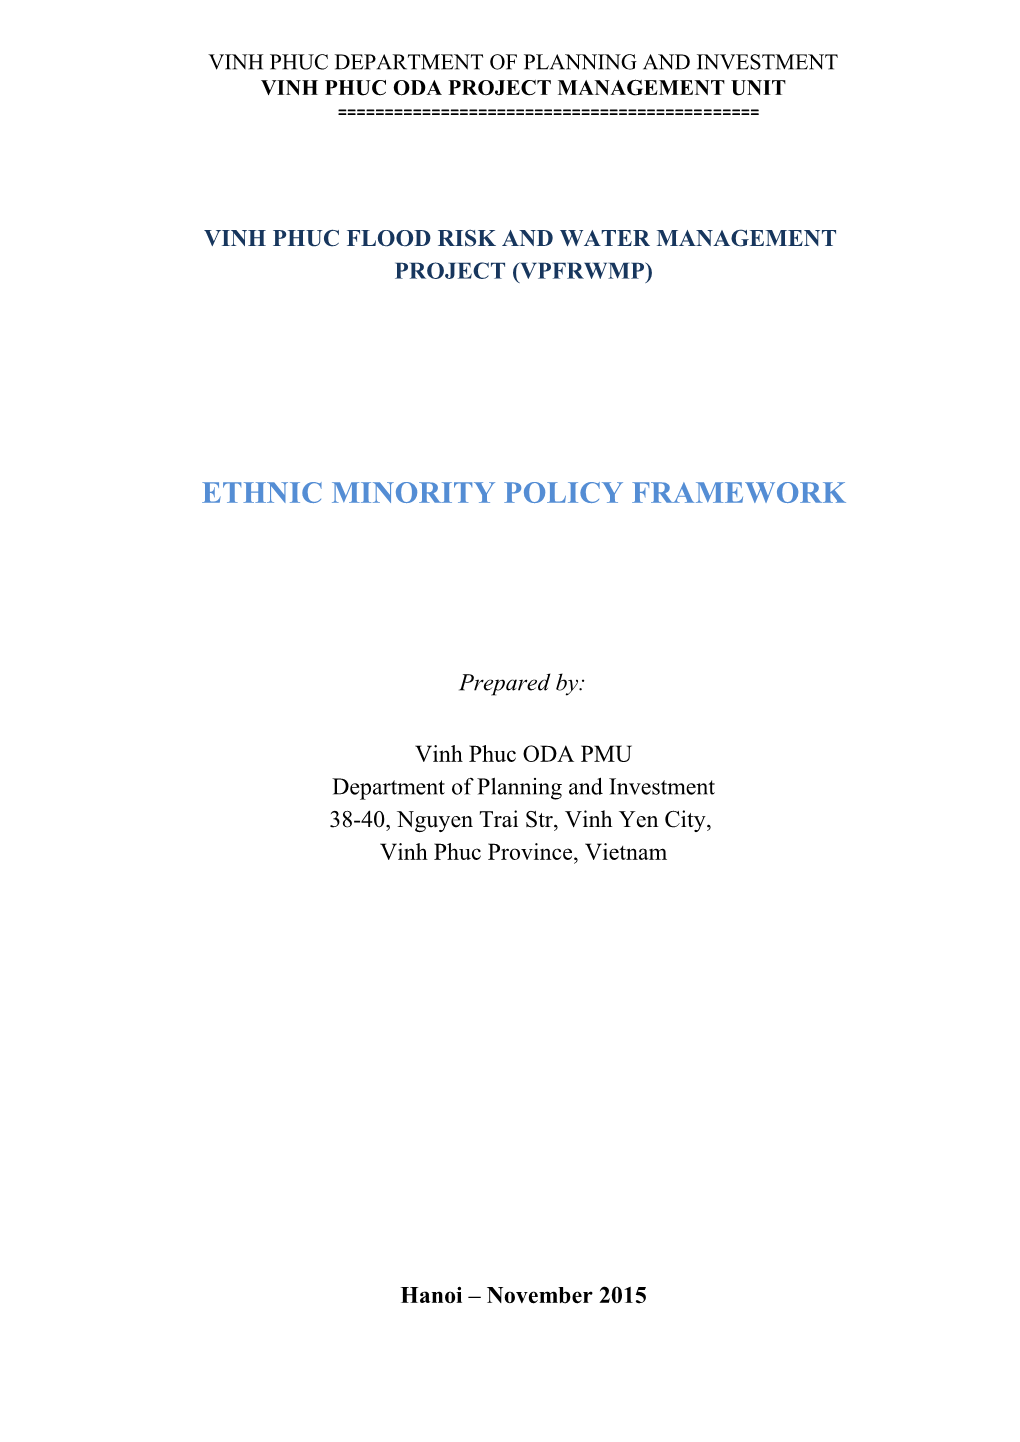 Vinh Phuc Flood Risk and Water Management